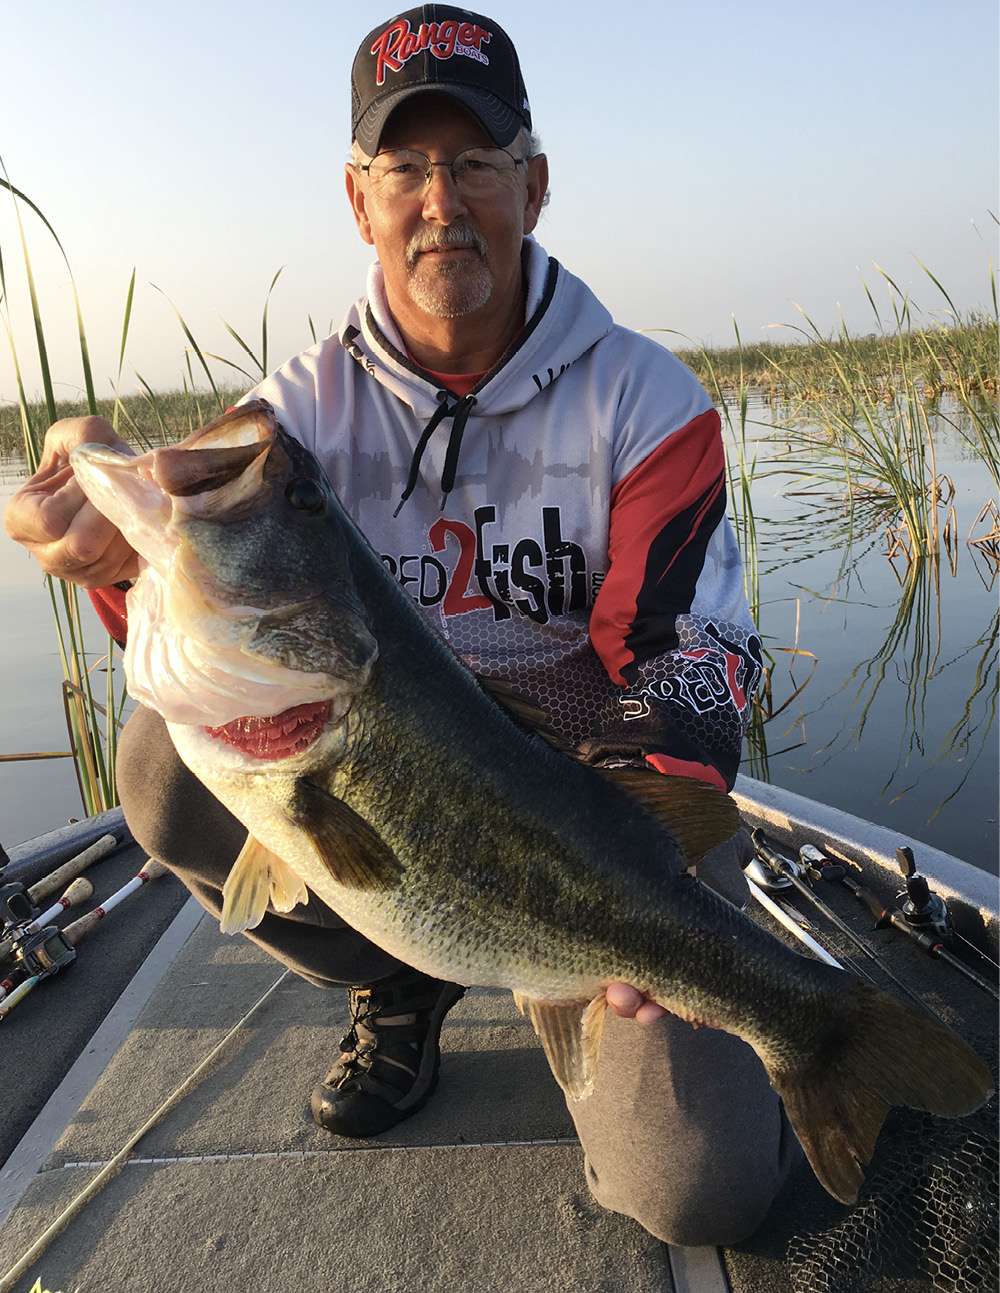 <b>Steve Sheridan</b><br>
Illinois<br>
11-4 Lake Okeechobee, Florida<br>
3/8-ounce Voyages spinnerbait (chartreuse/white) <br>
Water clarity: murky<br>
Depth: 2 feet<br>
Weather: clear
